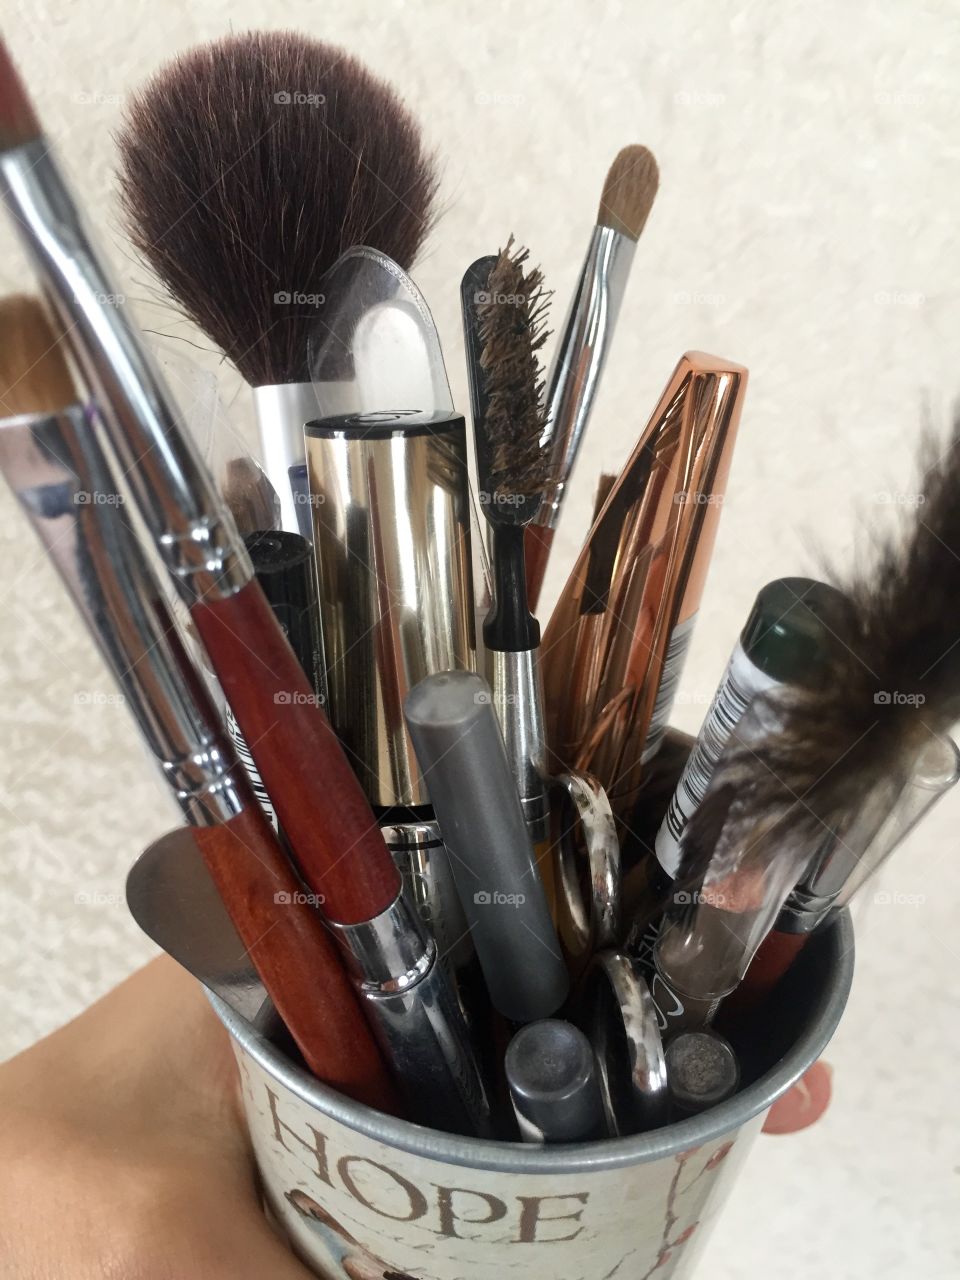 Make up brushes, pencils and mascara in the pot